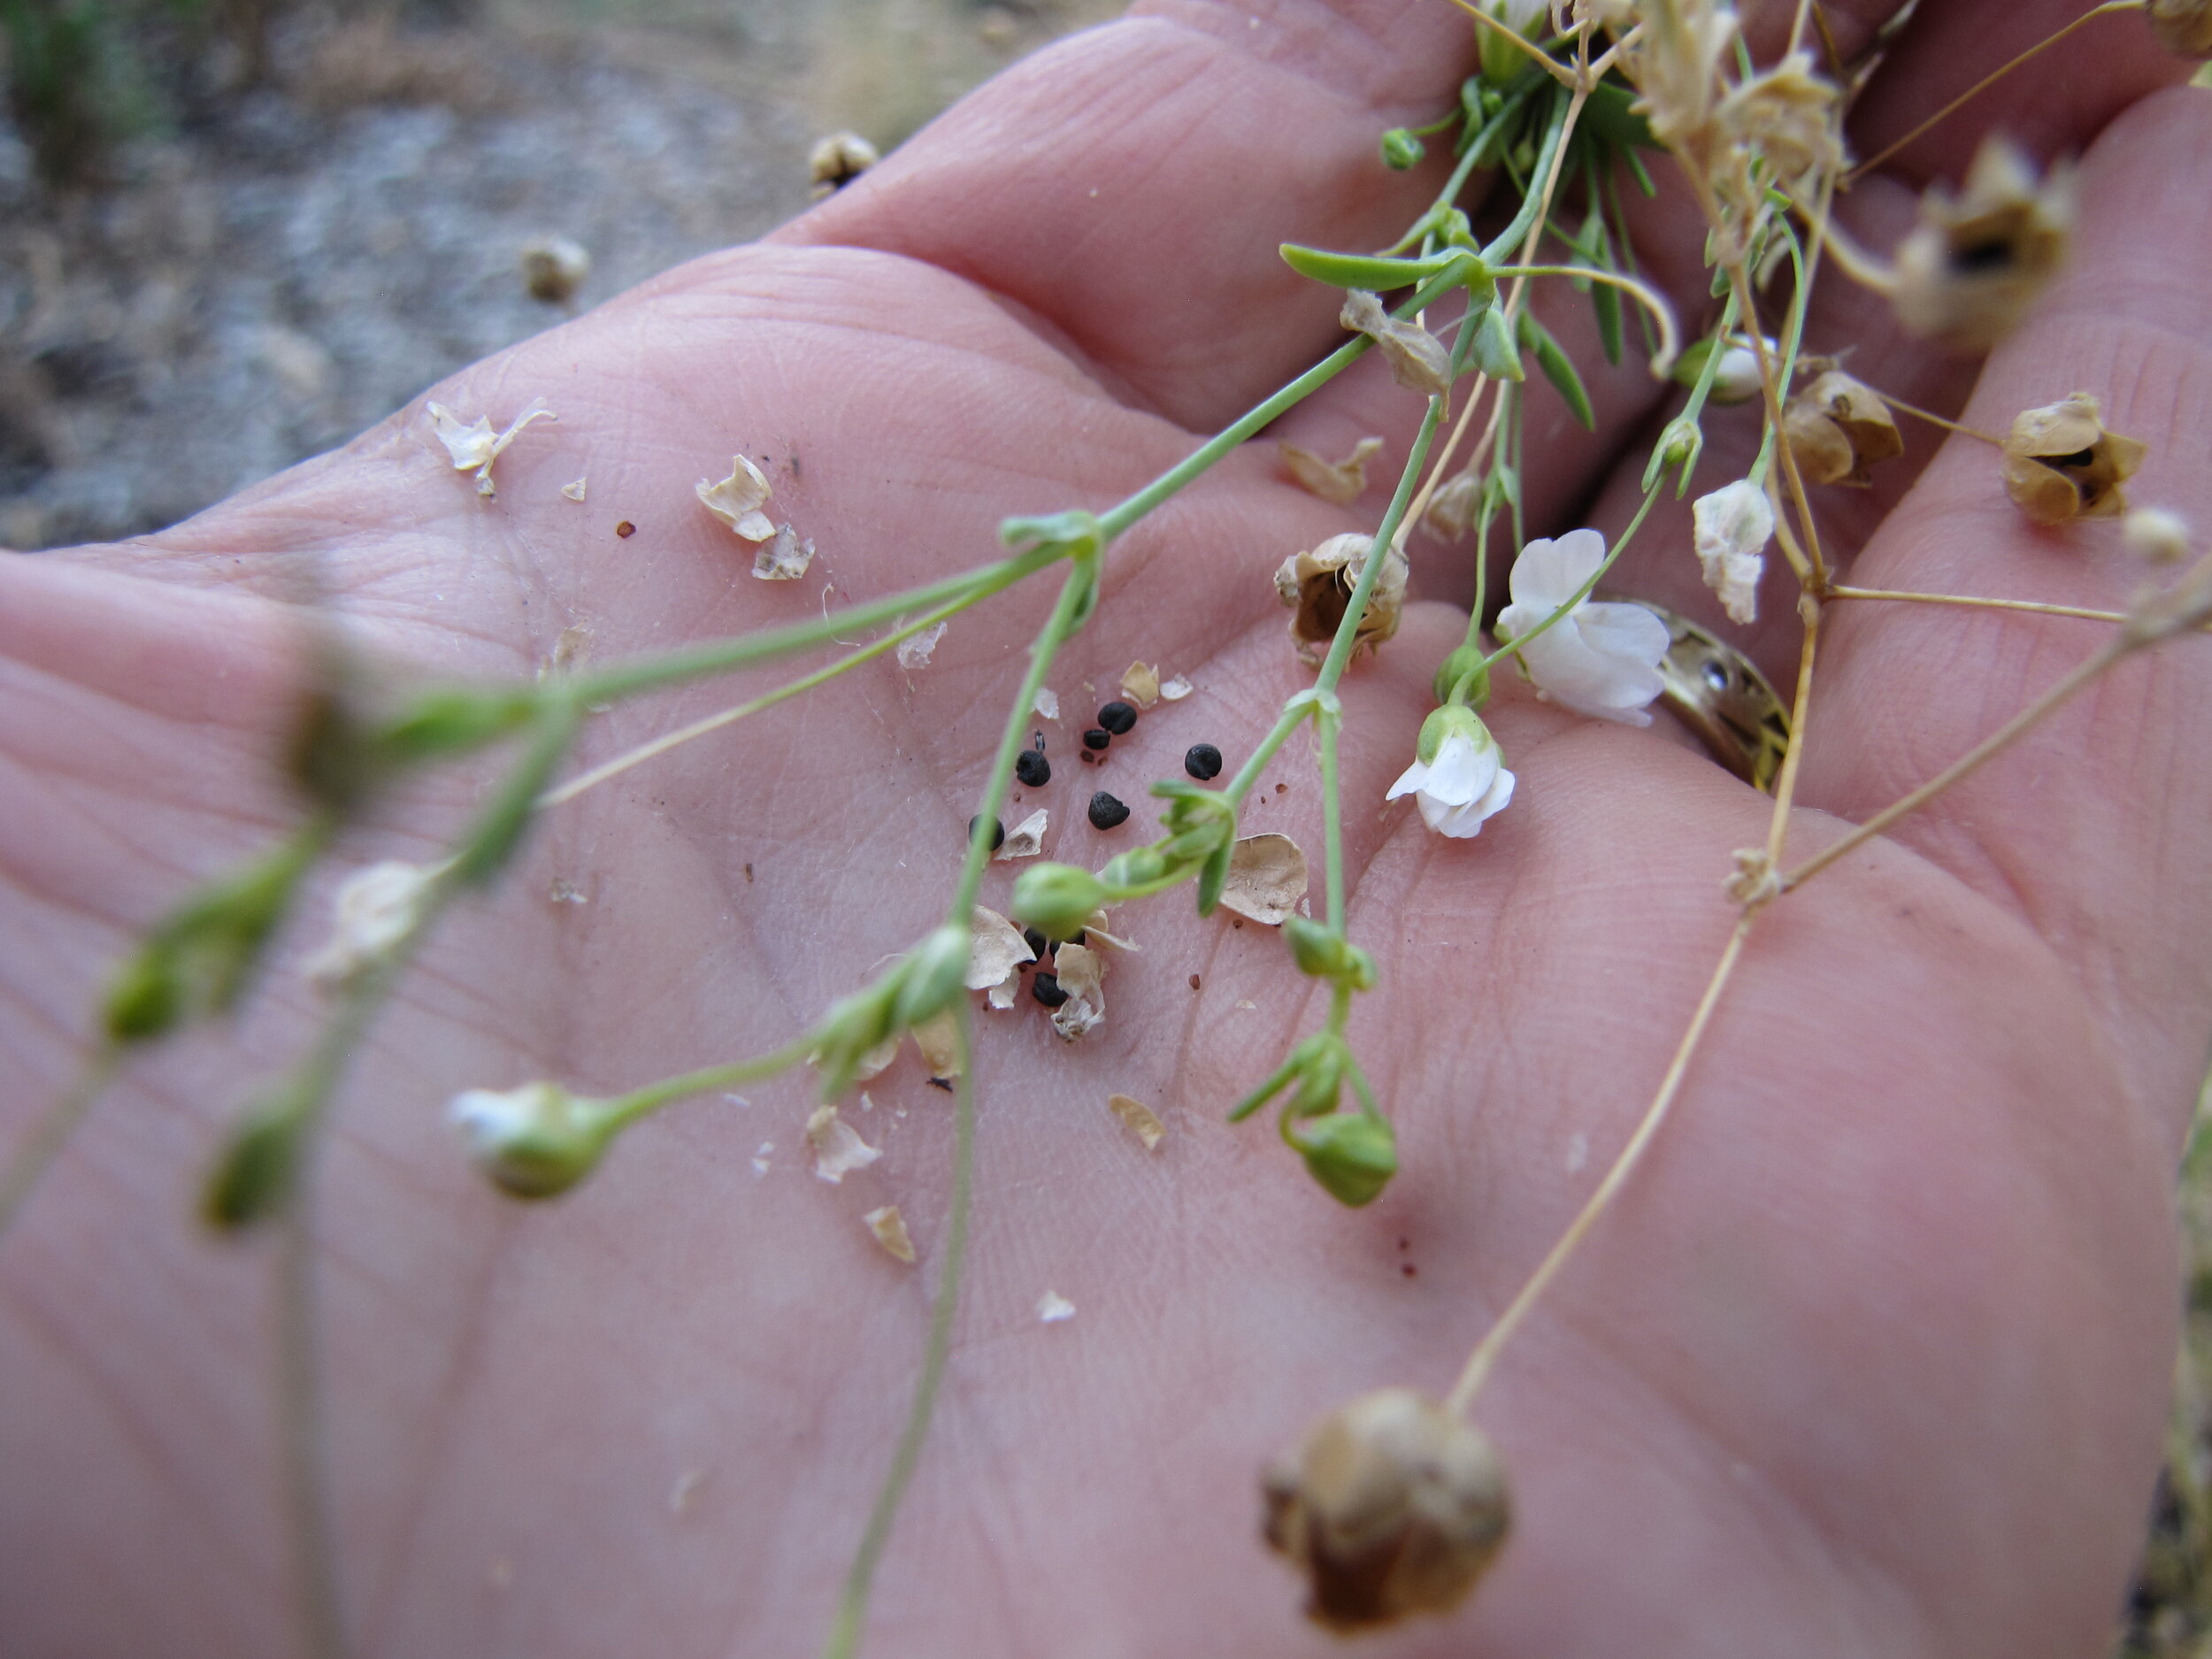 How to Harvest Your Own Seed: Tips for Collecting Flower Seed